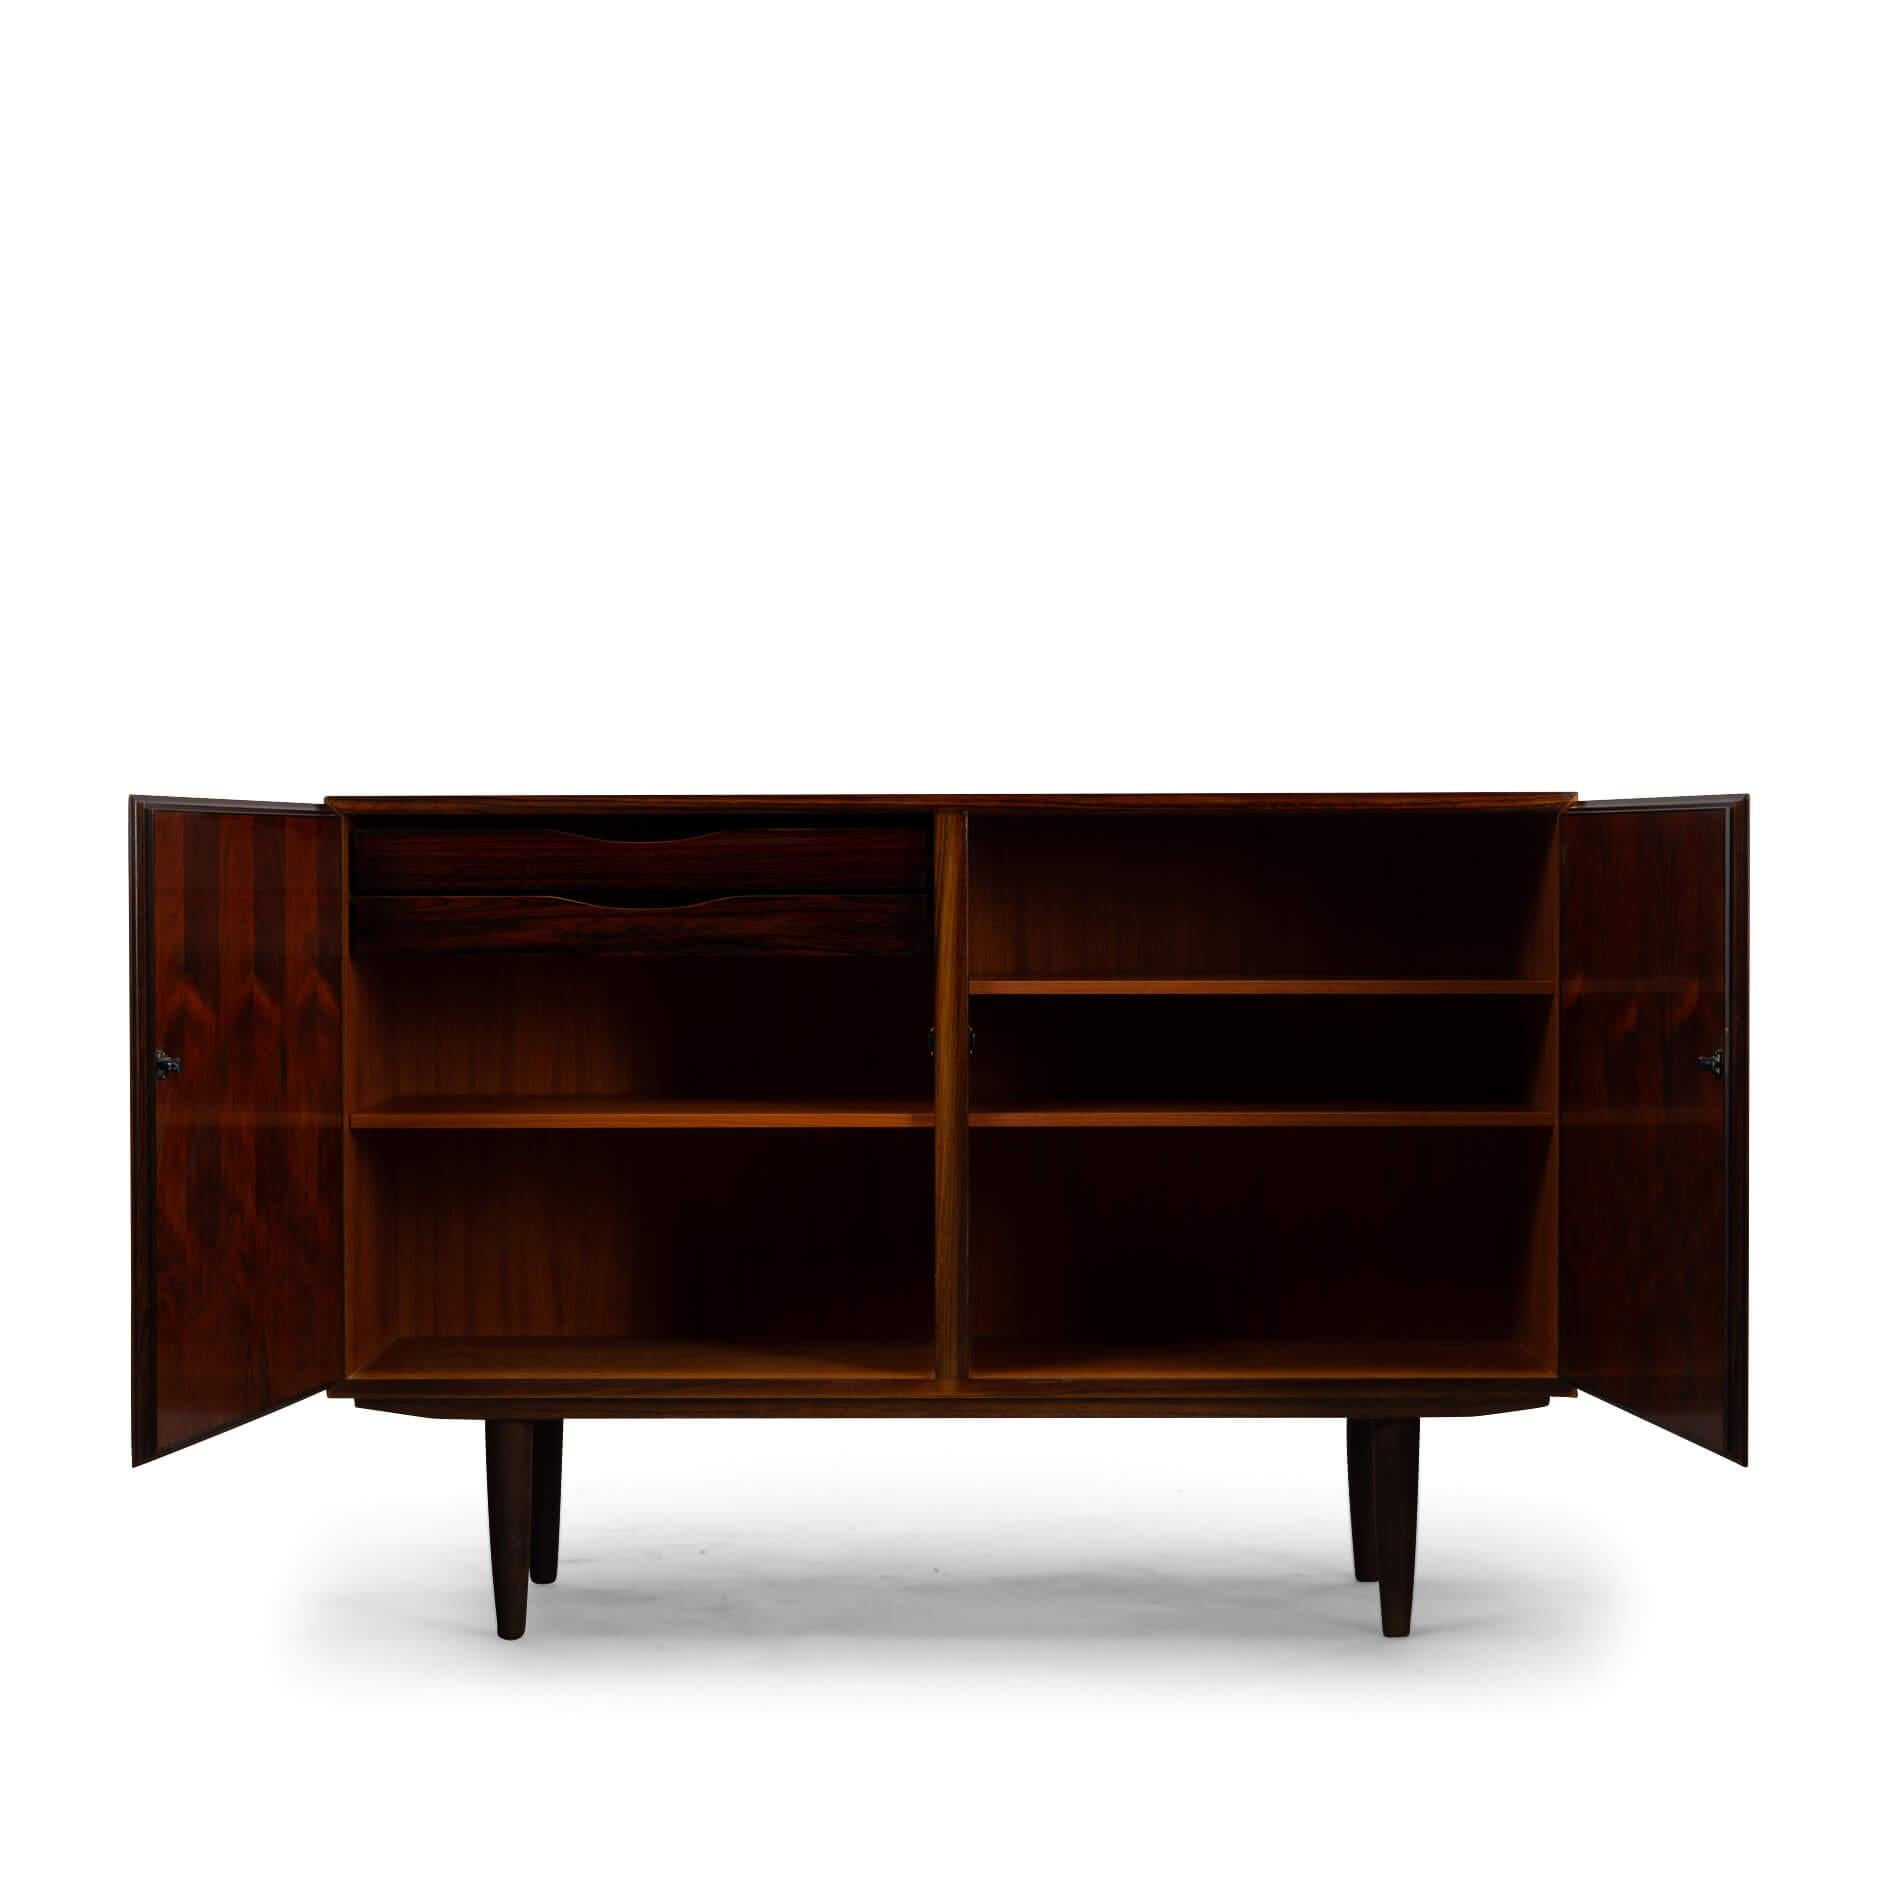 Mid-20th Century Danish Rosewood Sideboard Model No. 4 by Gunni Omann for Omann Jun, 1960s For Sale